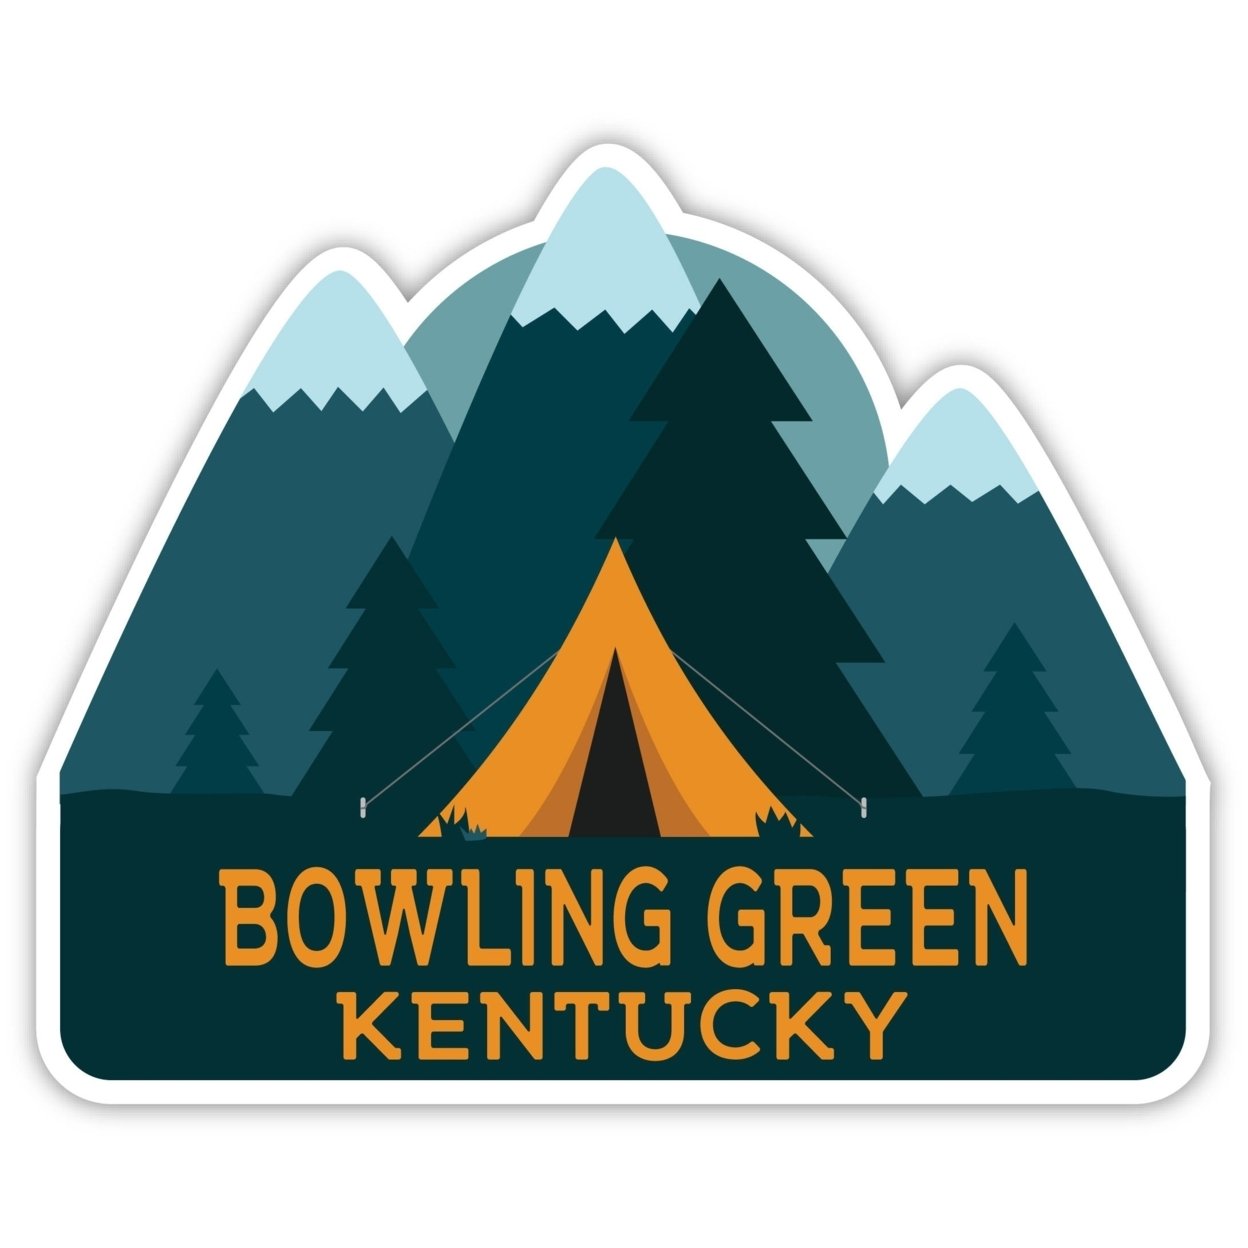 Bowling Green Kentucky Souvenir Decorative Stickers (Choose Theme And Size) - 4-Pack, 4-Inch, Tent